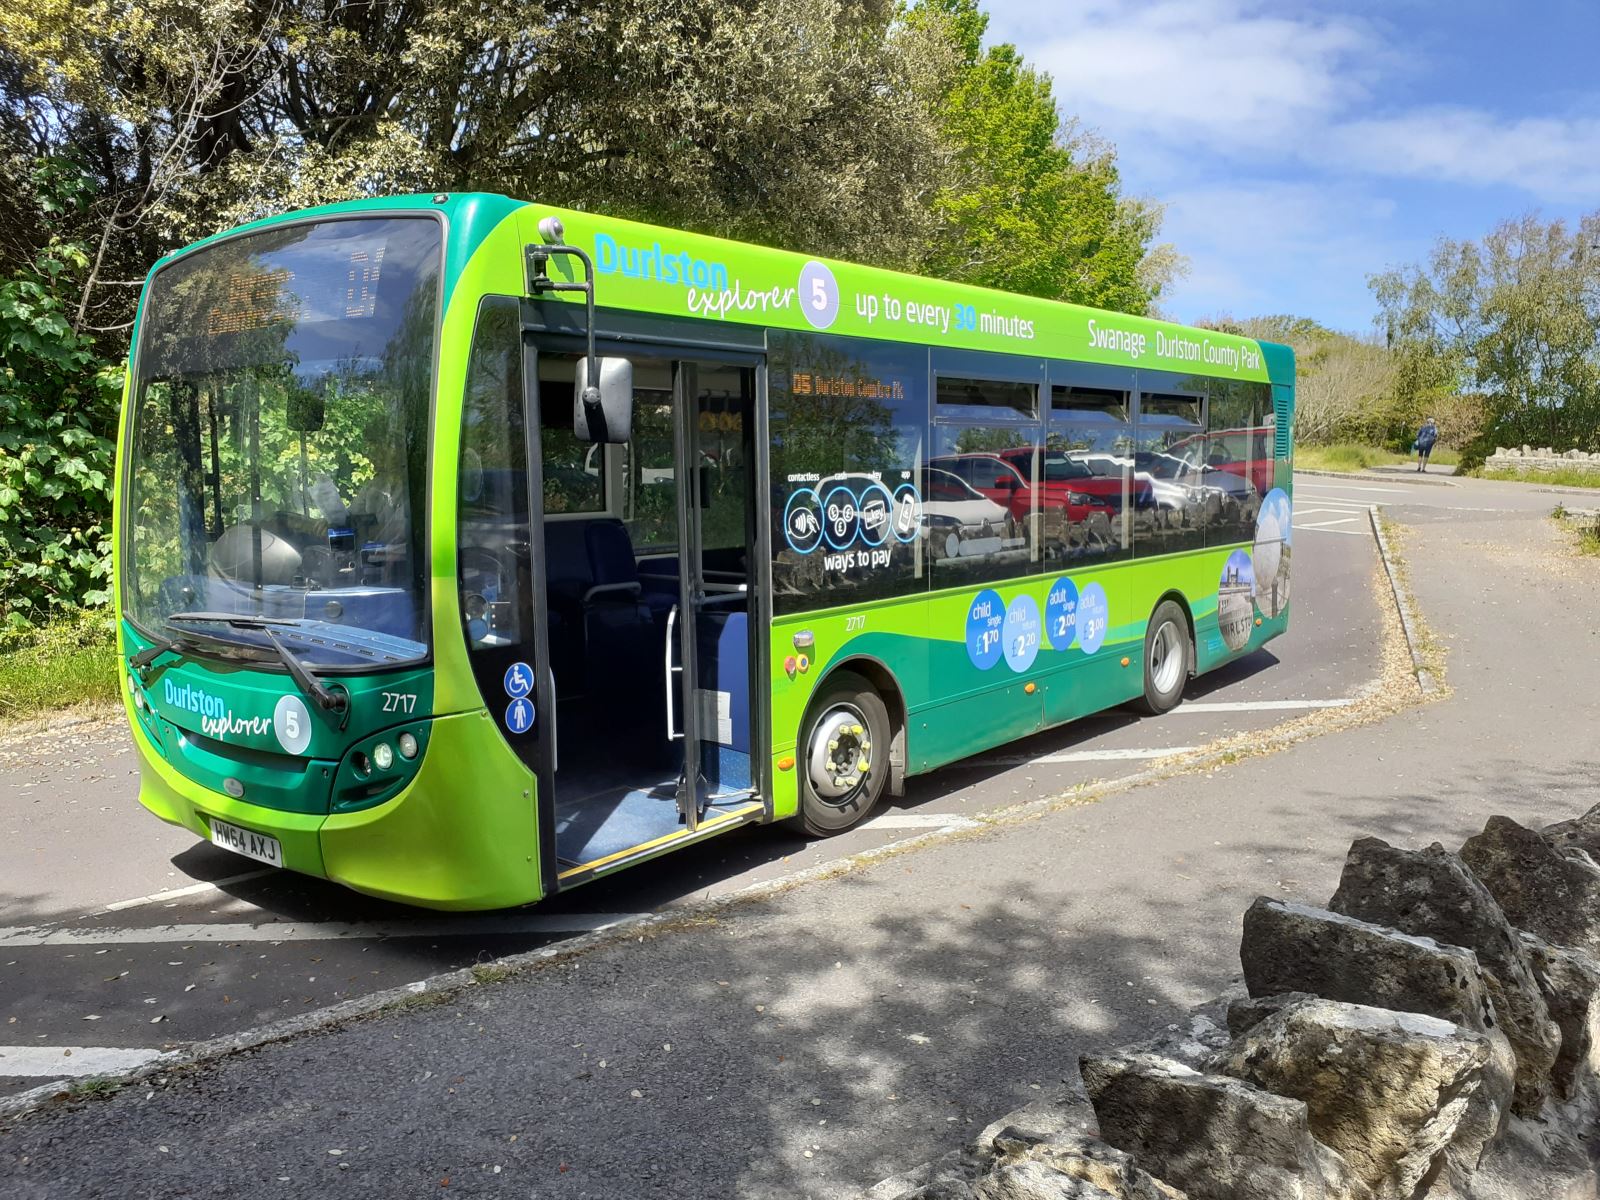 Durlston Bus at Bus Stop